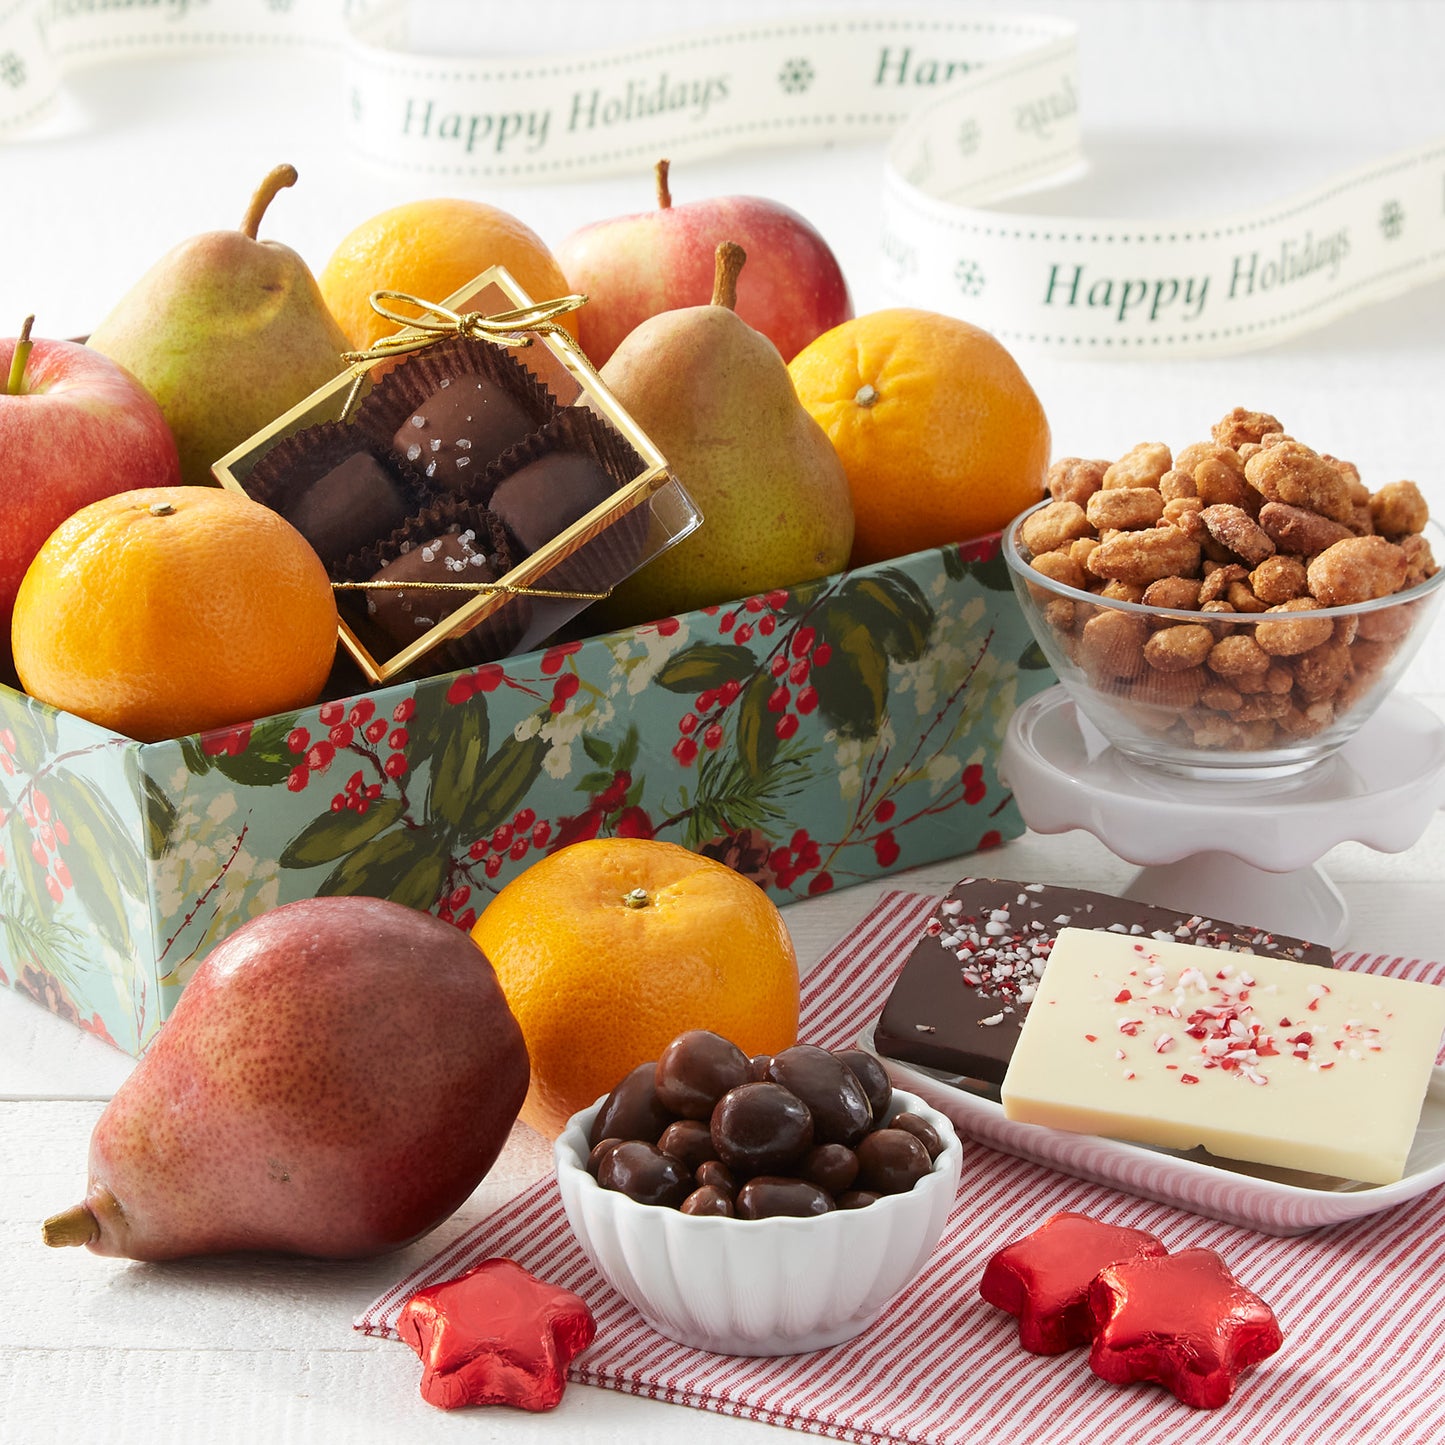 A decorated holiday crate filled with an assortment of fruit, nuts, and chocolate.